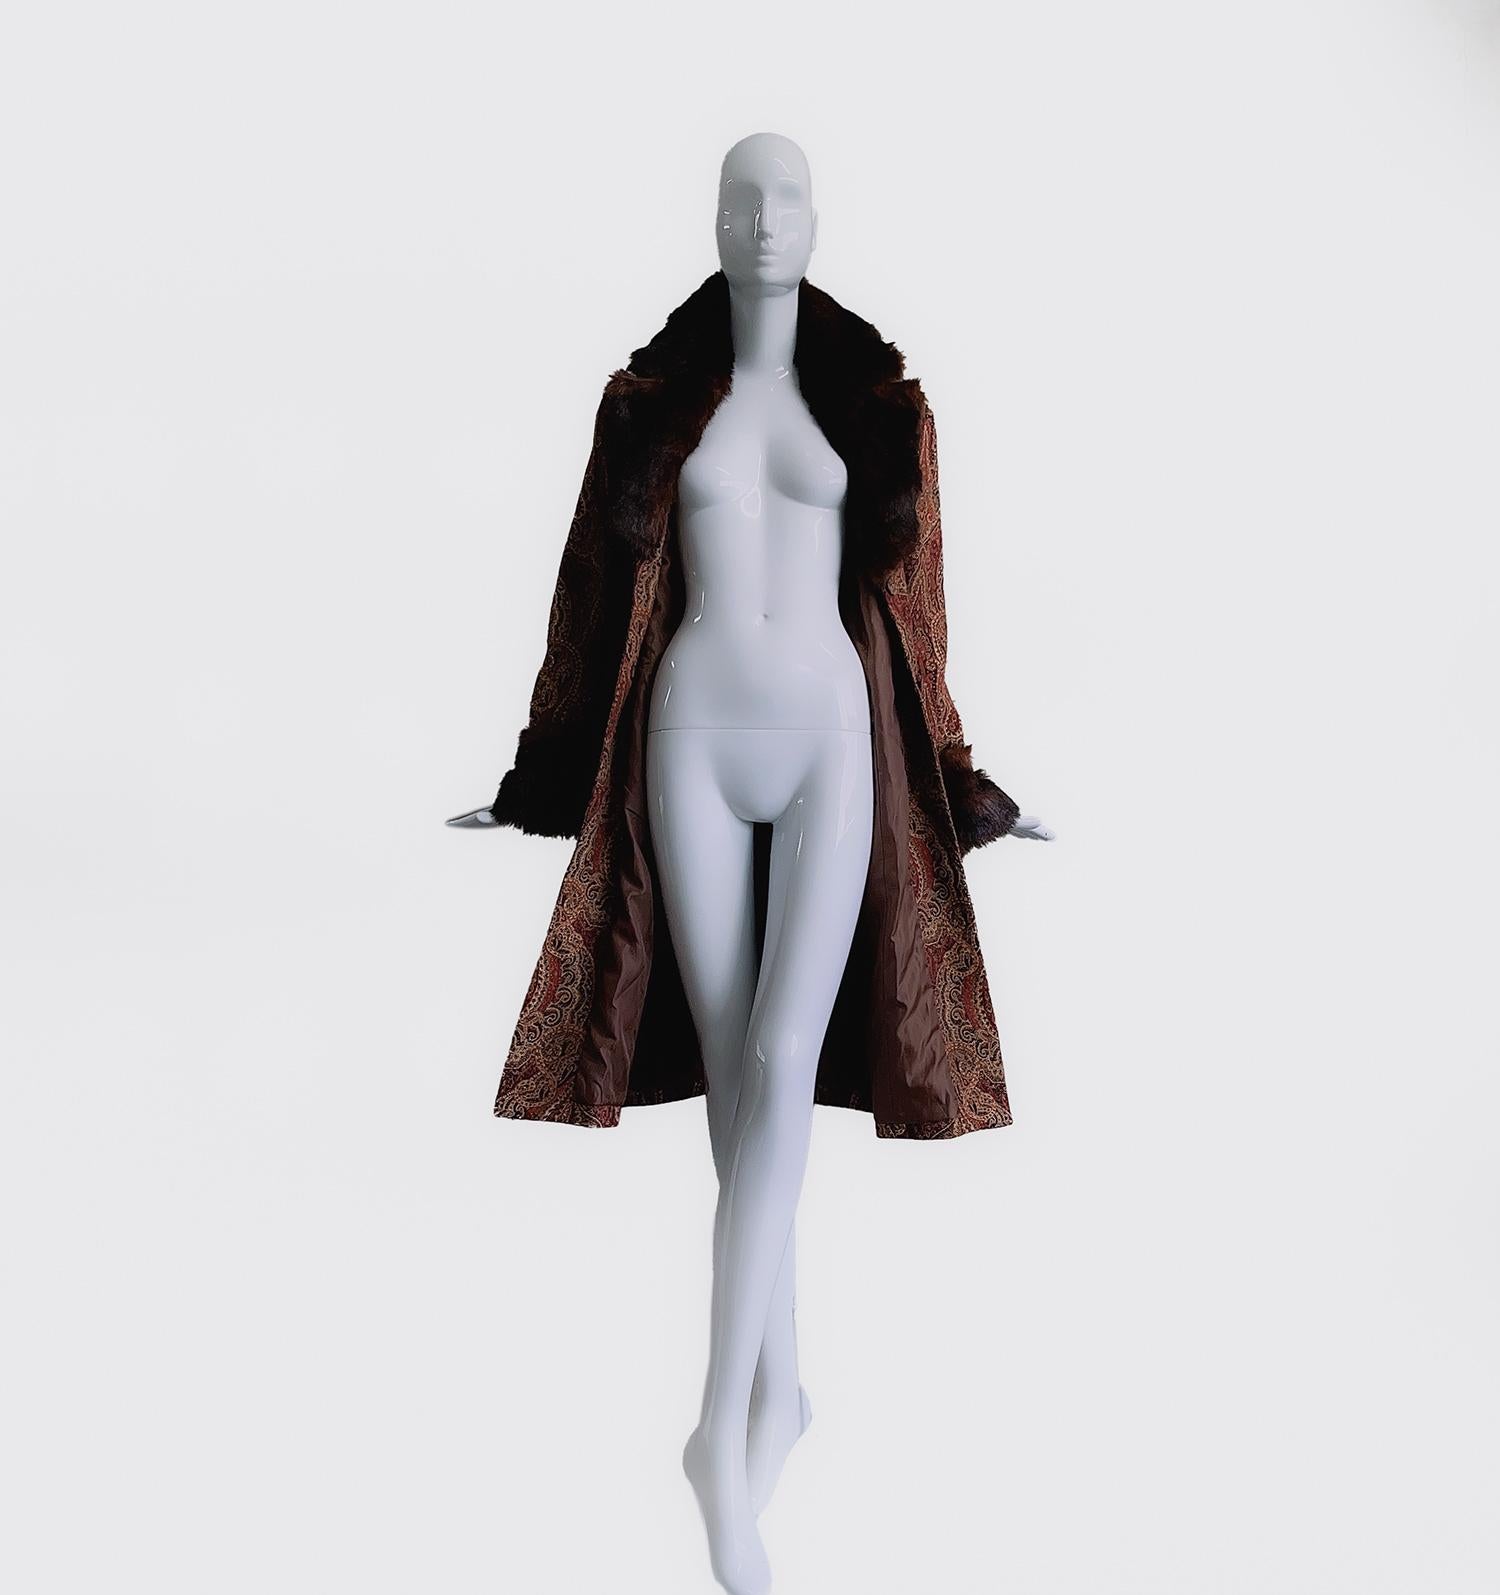 
This is a stunning late 1970s Coat wit soft faux fur collar and cuffs and beautiful ornamented fabric.
The cut and shape seem to be inspired by 1920s flapper coats and the big fur details and the subtle psychedelic ornaments link it back to the